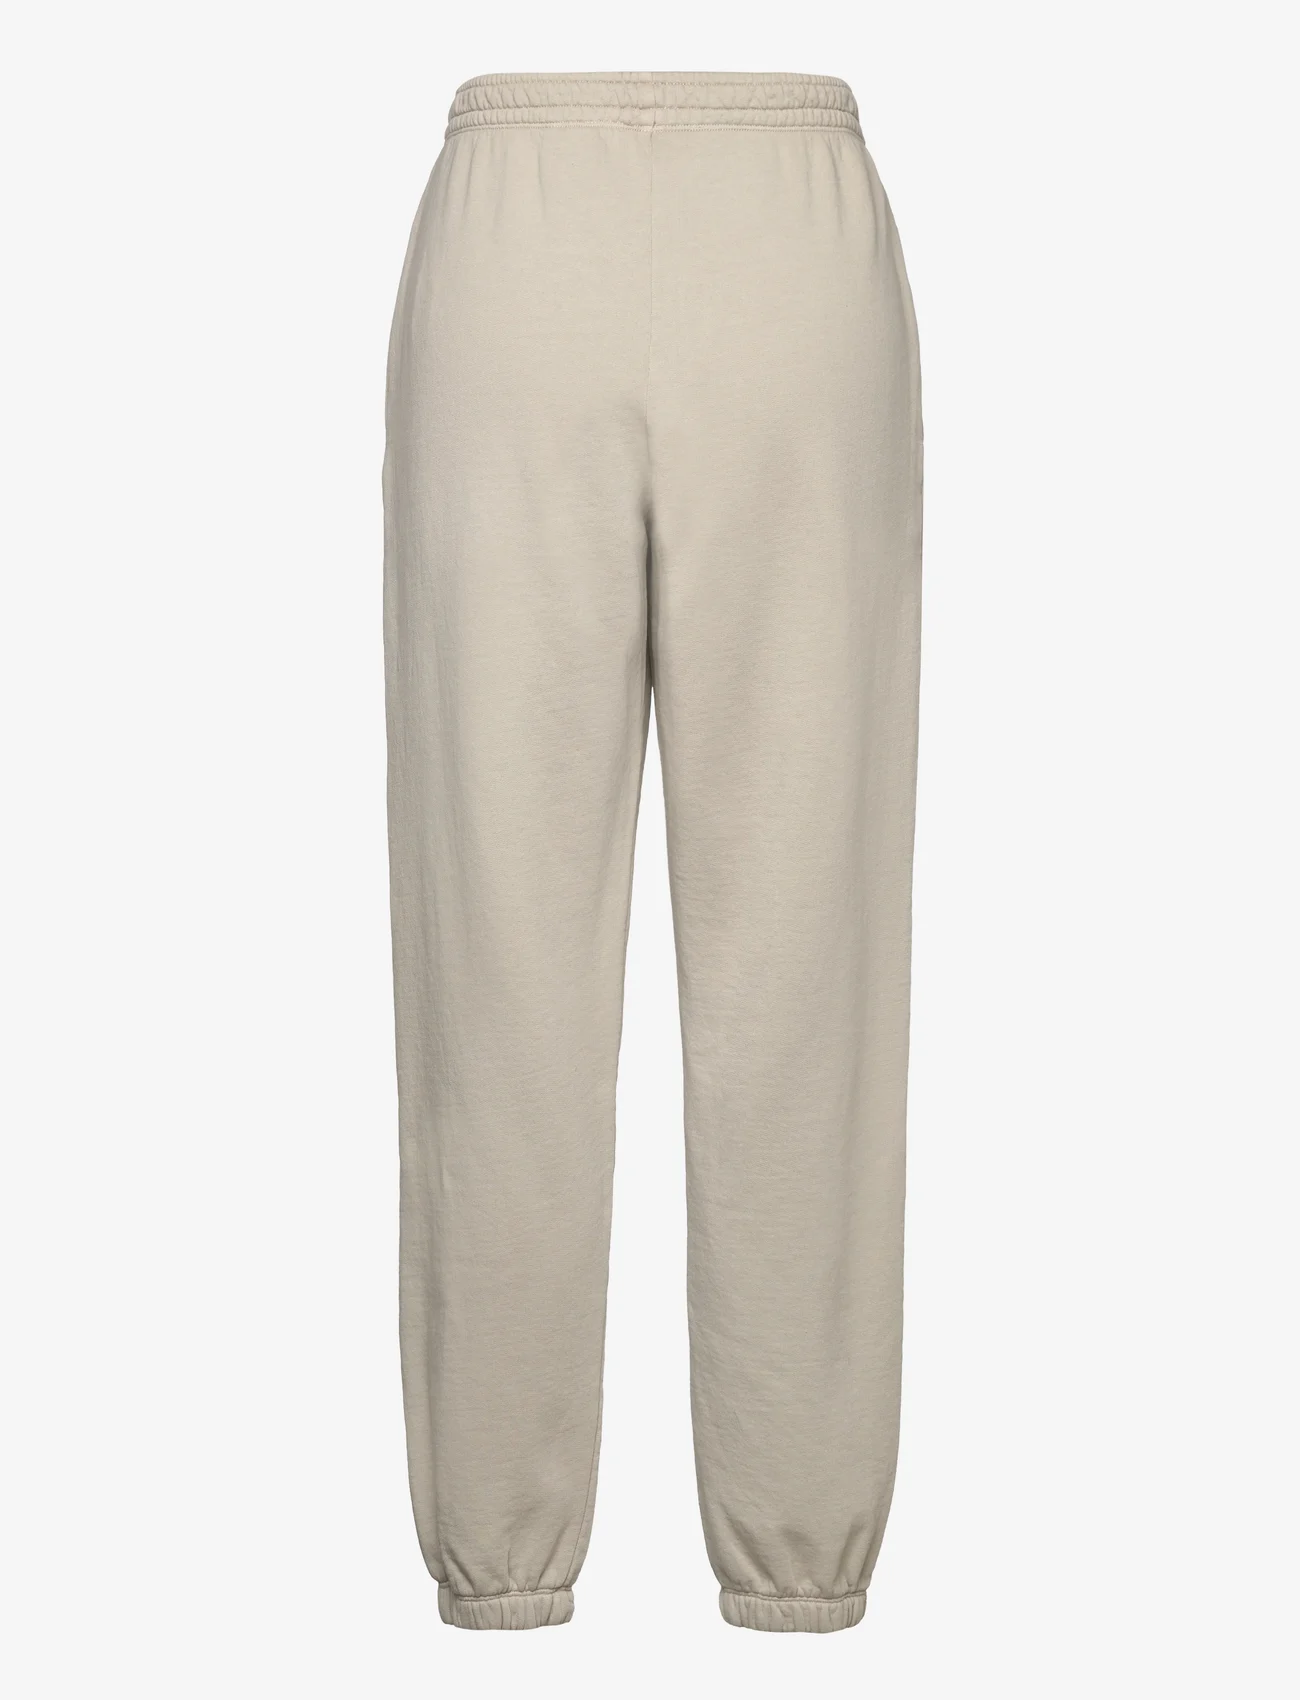 ROTATE Birger Christensen - Enzyme Wash Sweatpants - oyster gray - 1